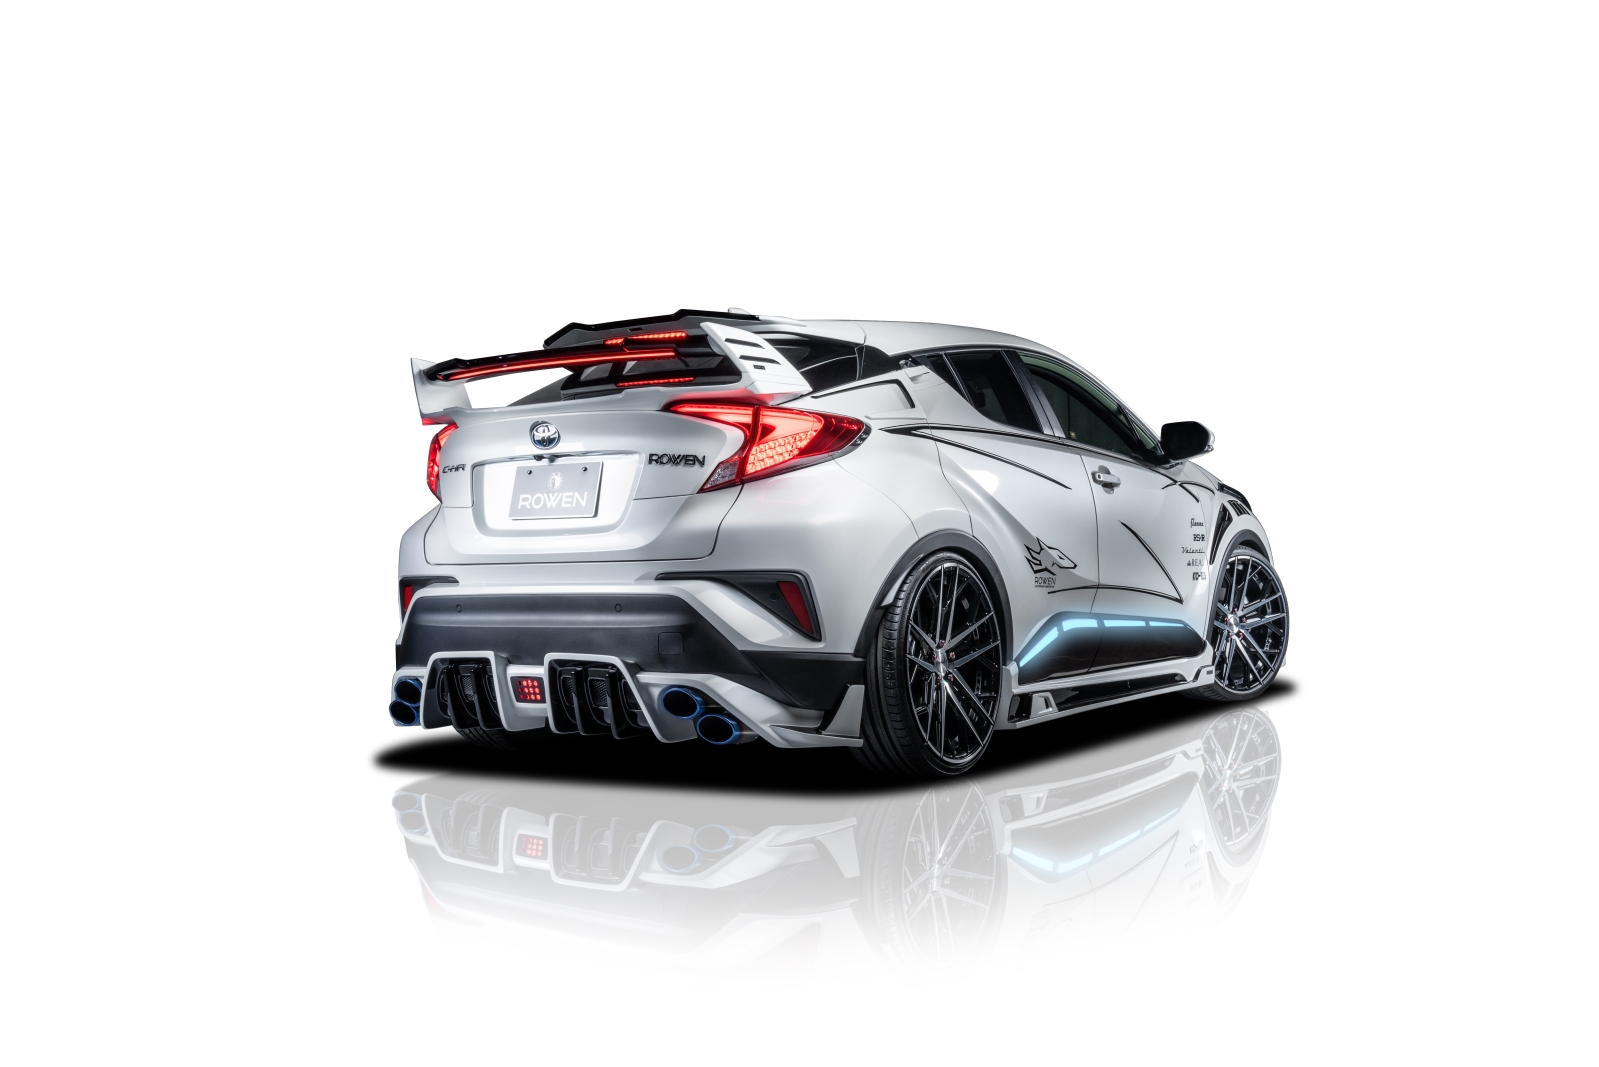 Check our price and buy Rowen body kit for Toyota C-HR Late Model